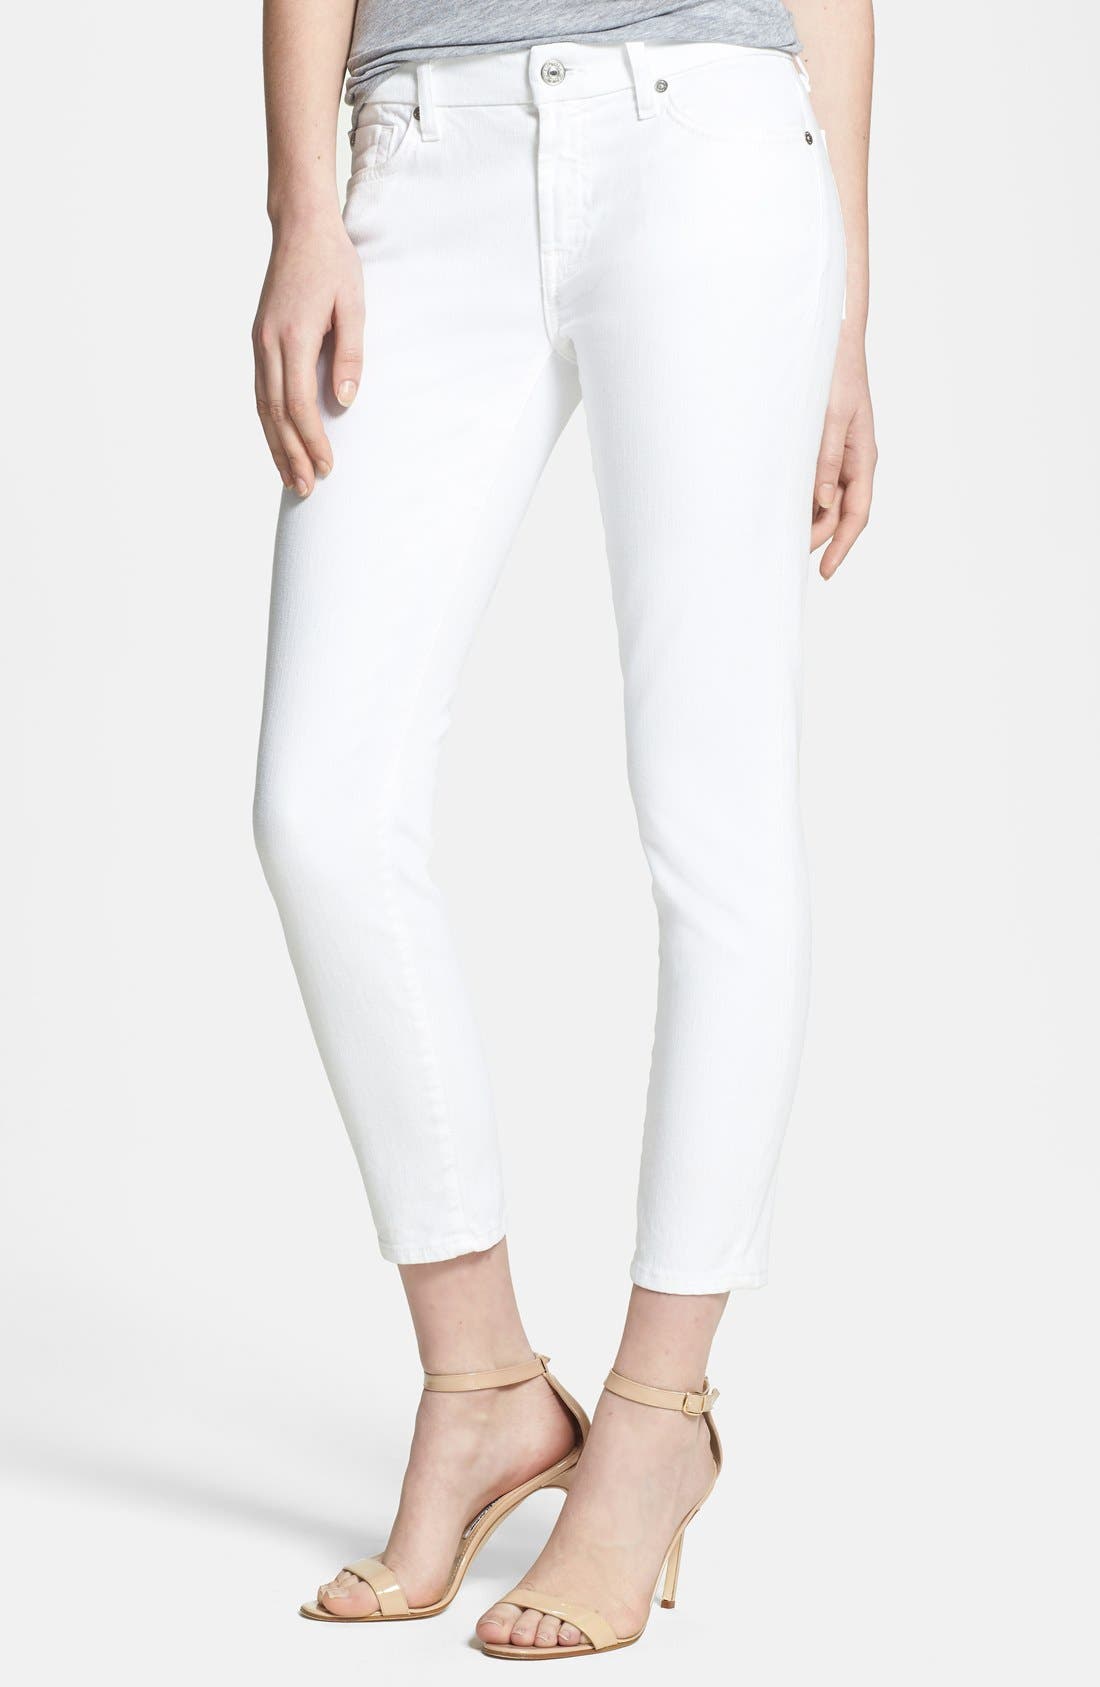 7 for all mankind kimmie crop